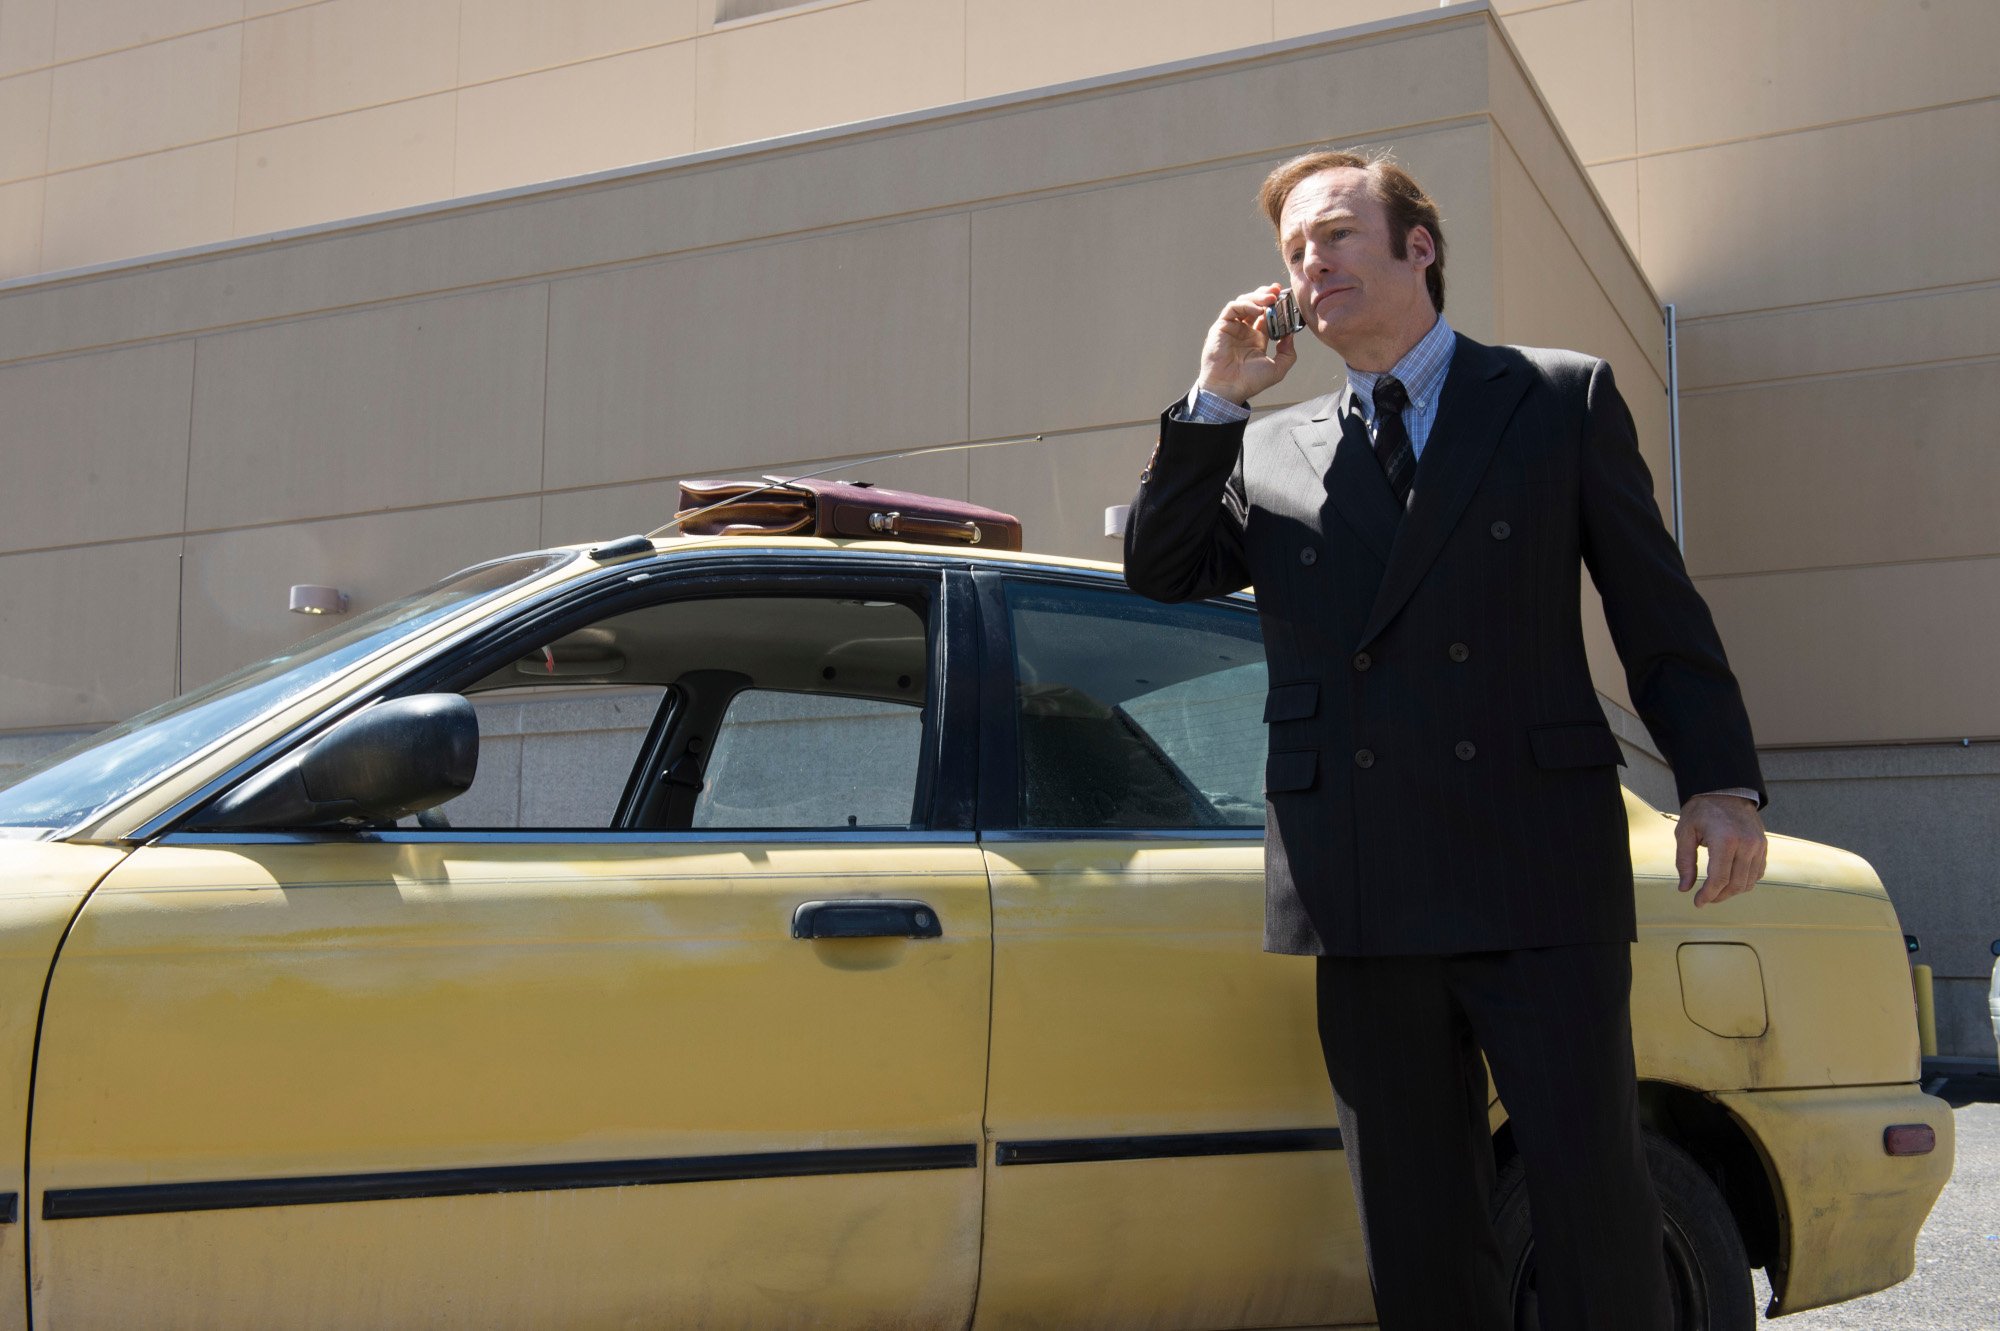 Bob Odenkirk as Jimmy McGill in 'Better Call Saul' Season 1 Episode 1. He's standing near his car and talking on his cellphone.